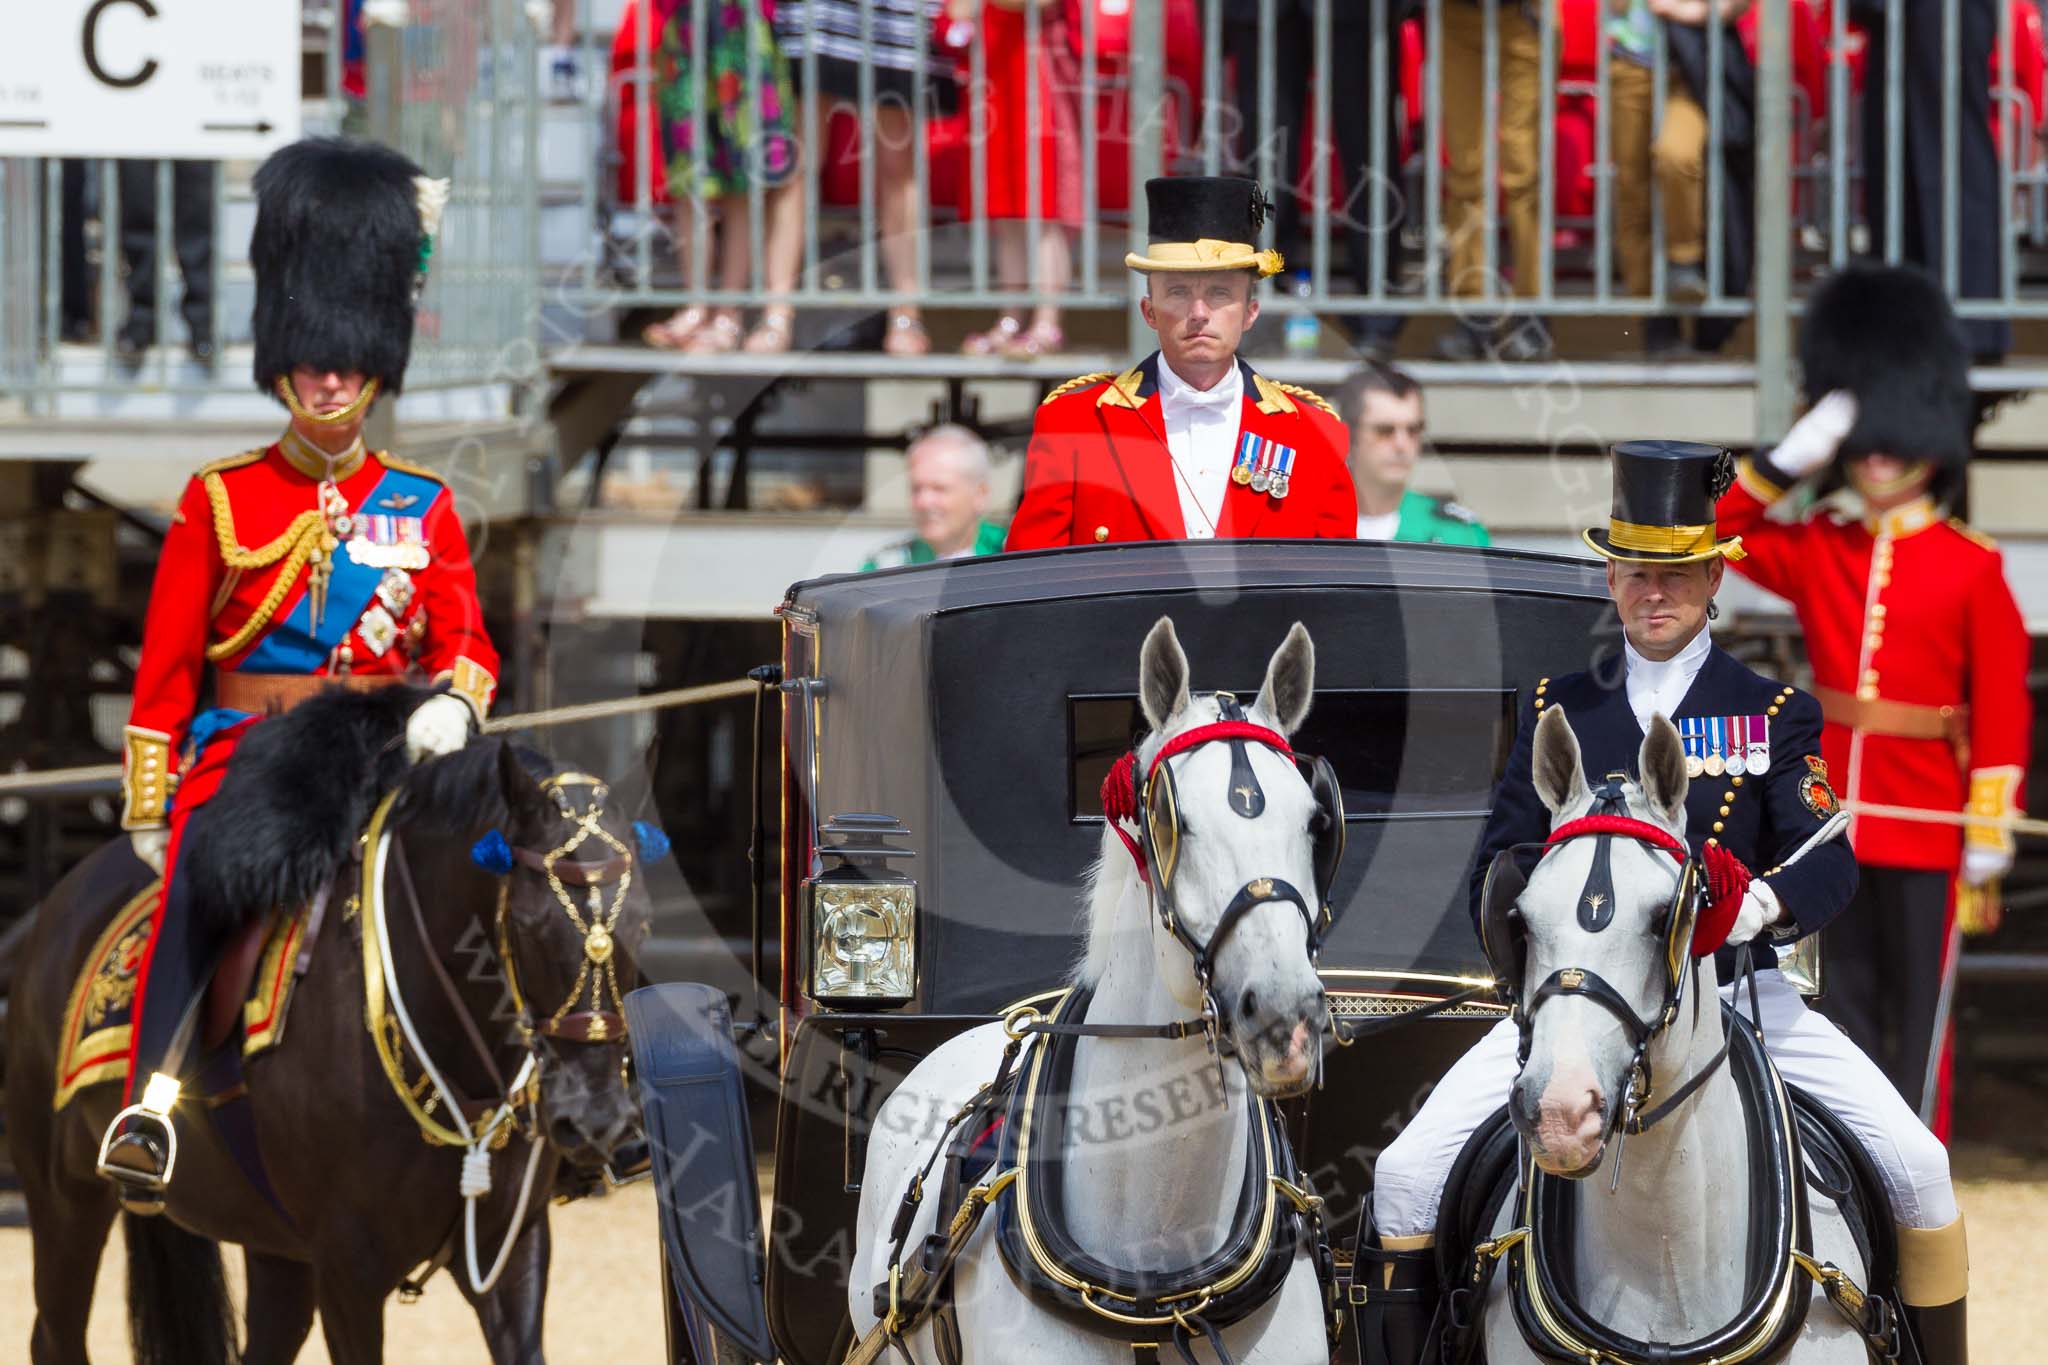 The Colonel's Review 2015.
Horse Guards Parade, Westminster,
London,

United Kingdom,
on 06 June 2015 at 10:59, image #187